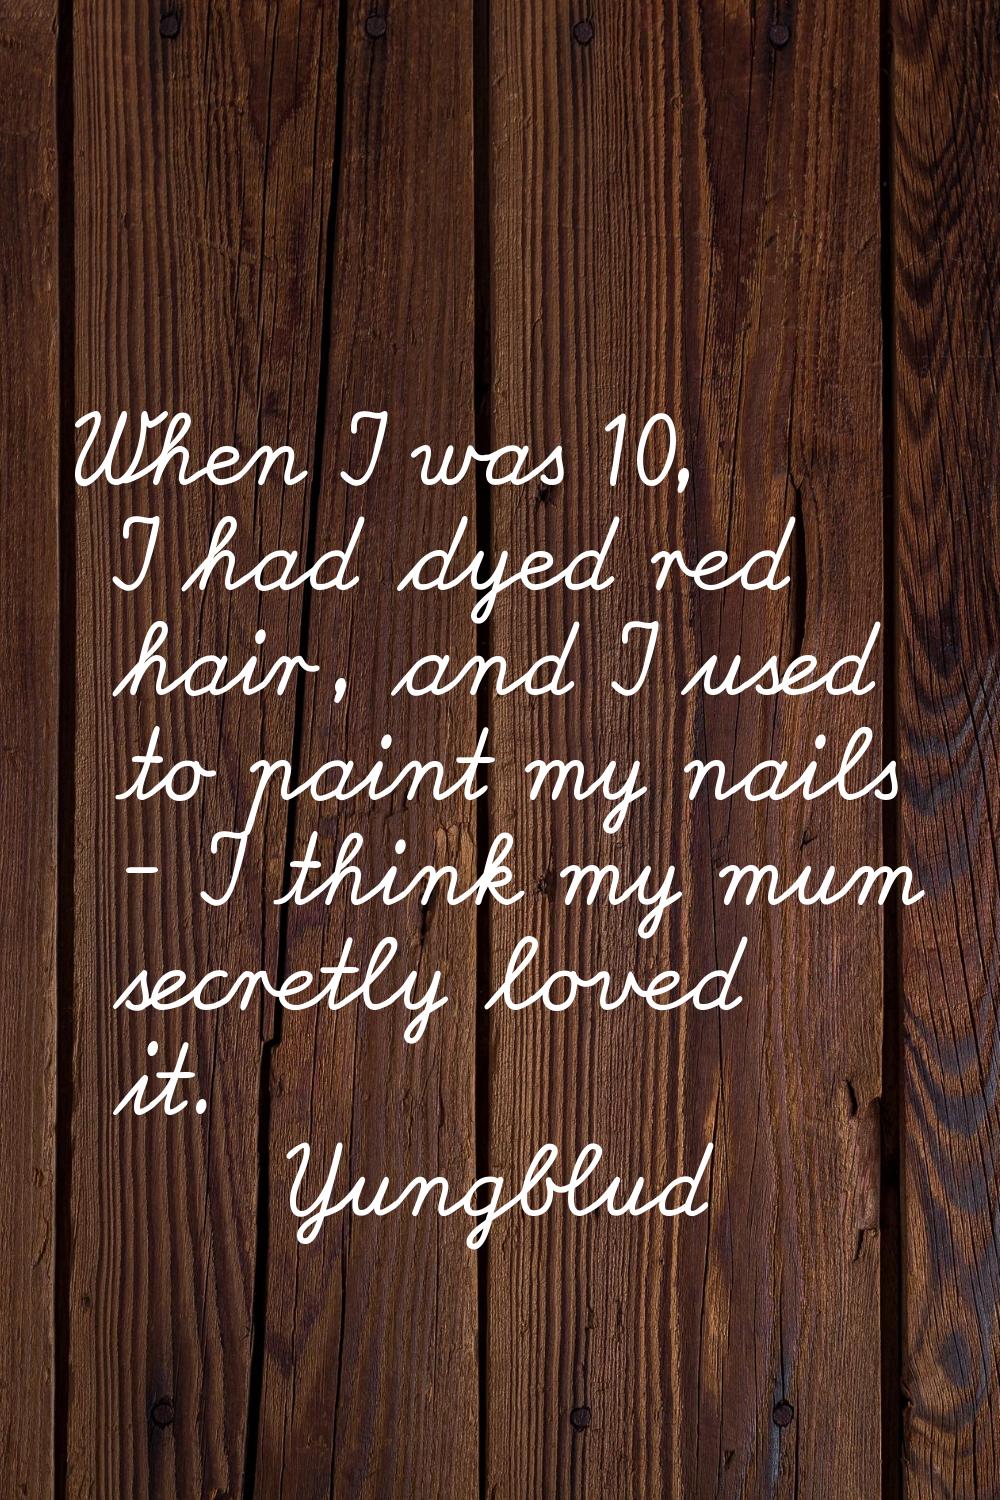 When I was 10, I had dyed red hair, and I used to paint my nails - I think my mum secretly loved it